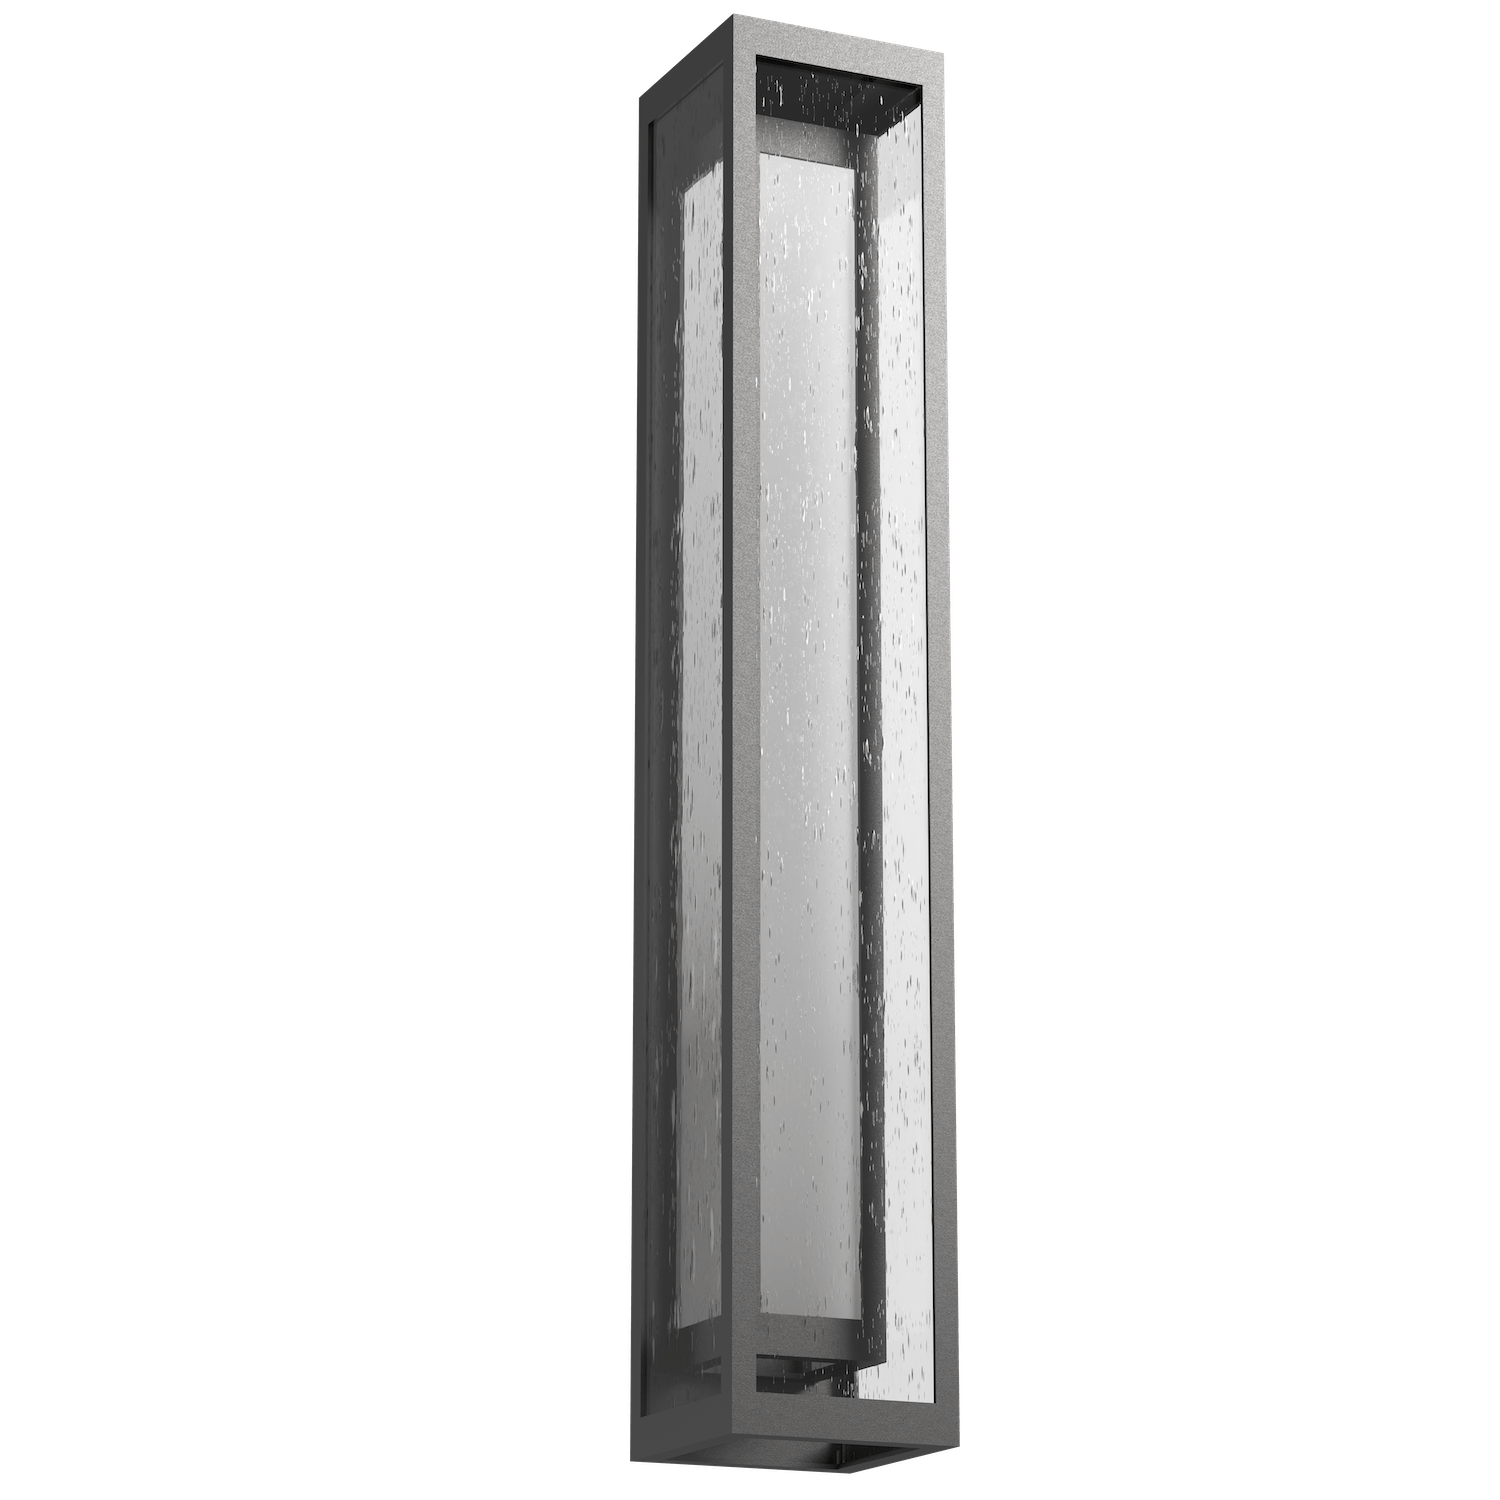 ODB0027-36-AG-F-Hammerton-Studio-Double-Box-36-inch-outdoor-sconce-with-argento-grey-finish-and-frosted-glass-shade-and-LED-lamping